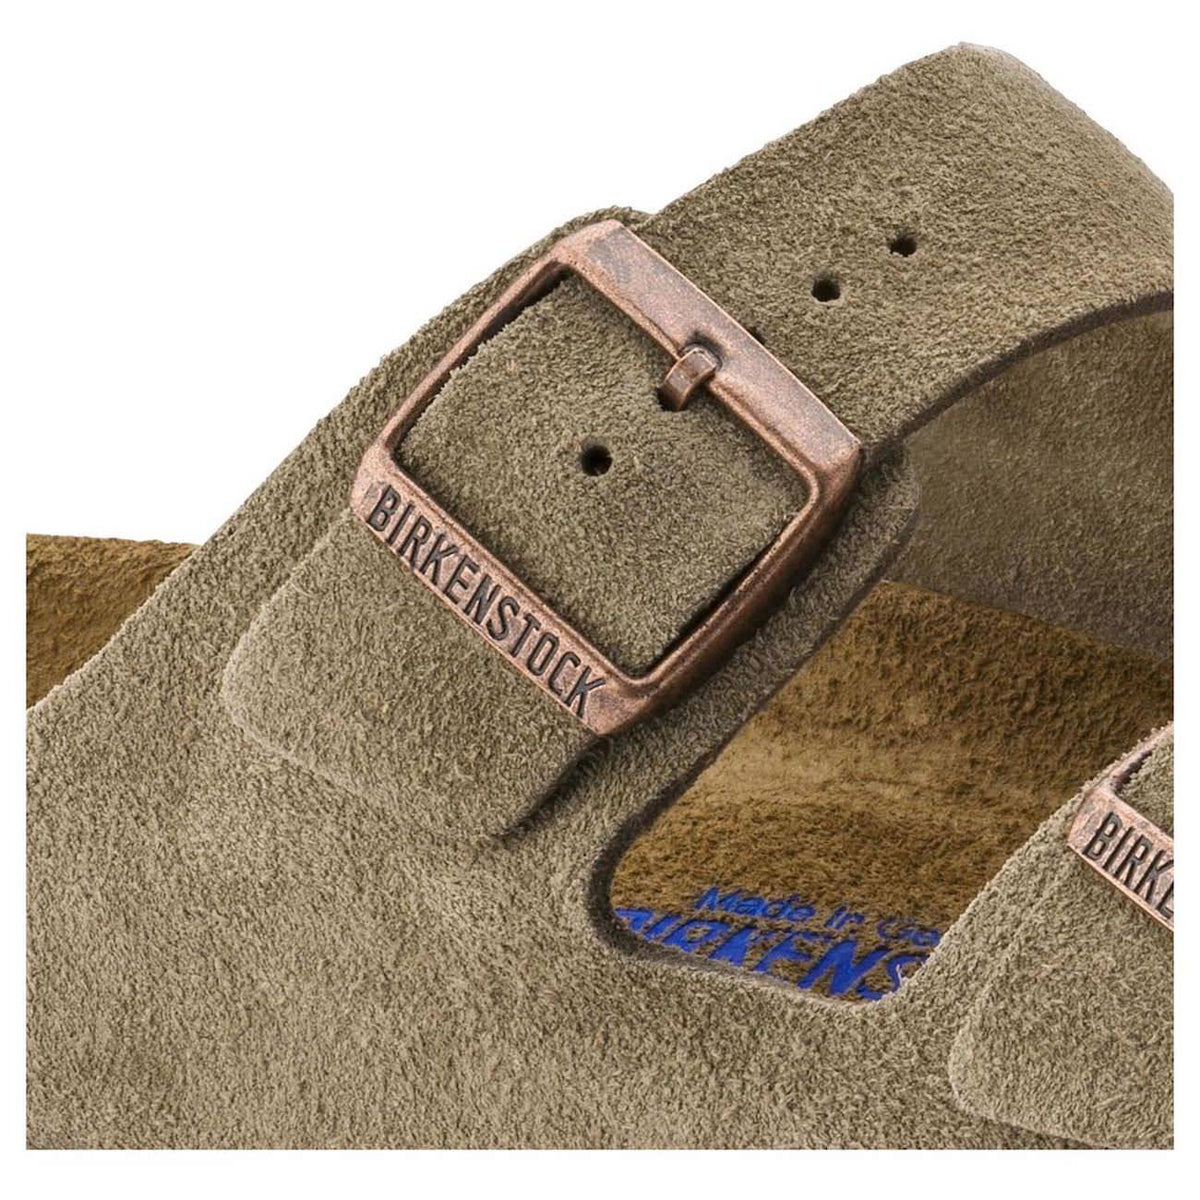 Birkenstock Classic, Arizona, Soft Footbed, Suede Leather, Narrow Fit, Taupe Sandals Birkenstock Classic 